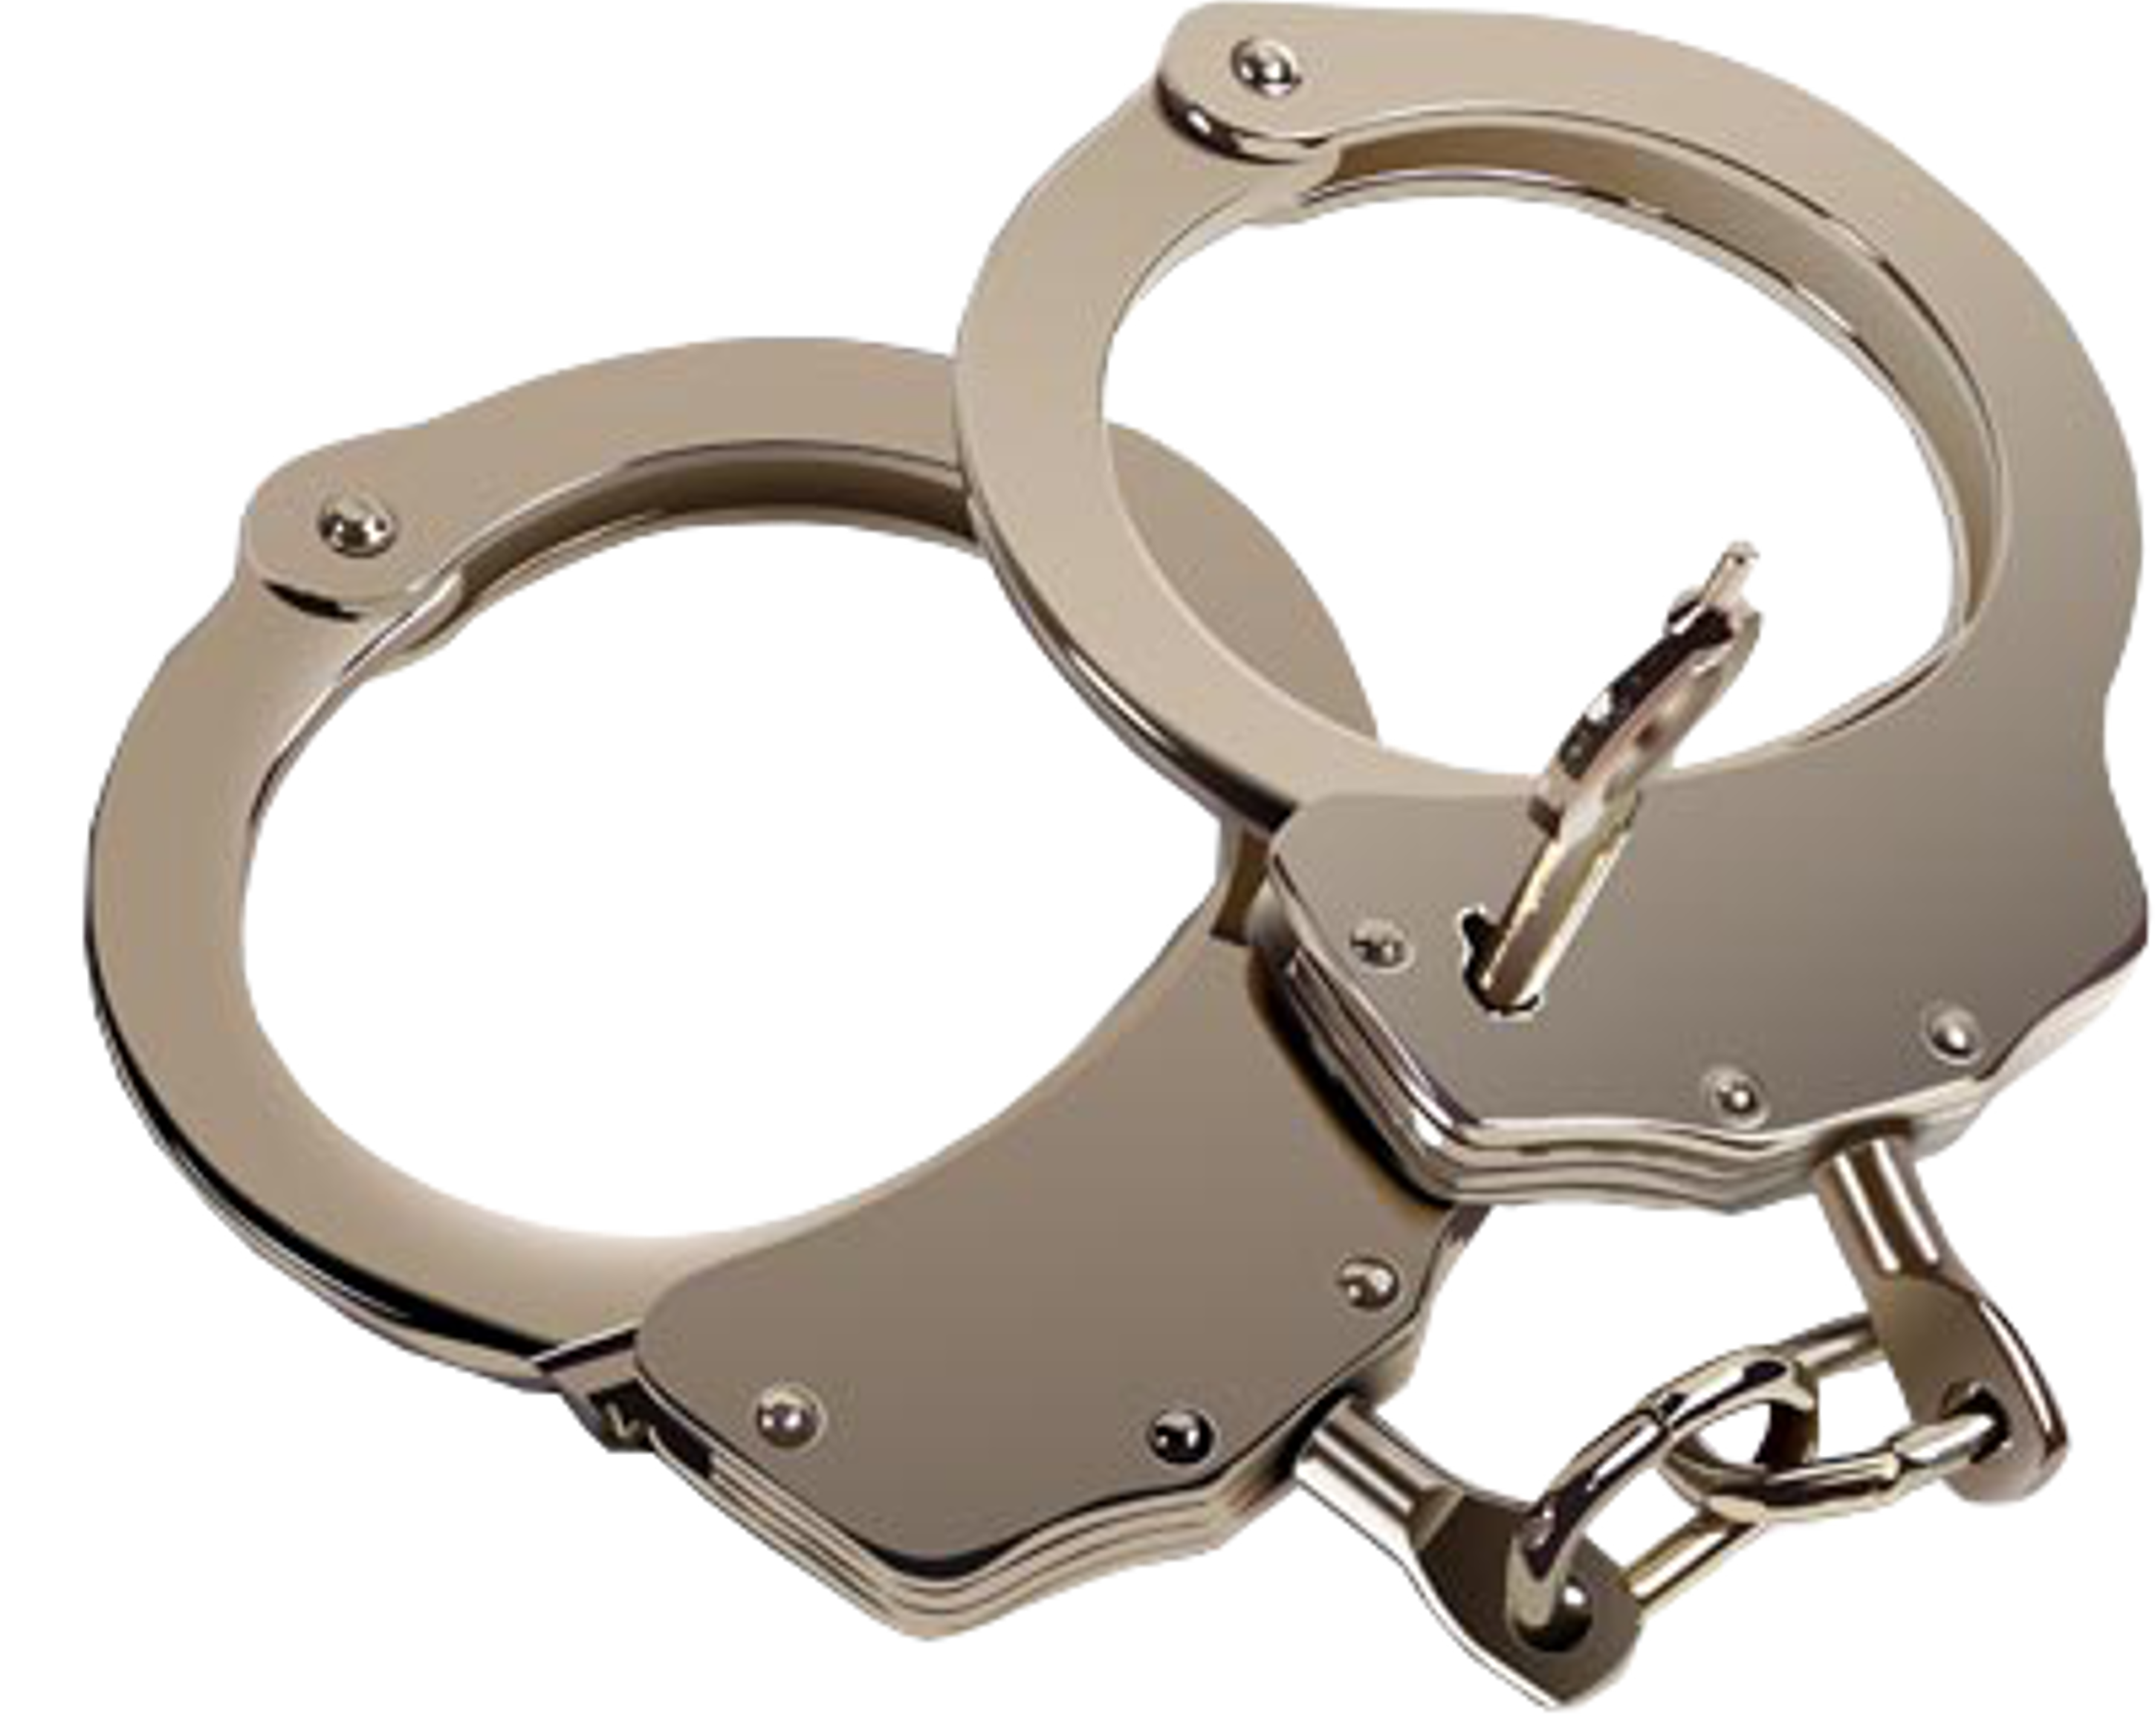 Chain clipart handcuff. Handcuffs png images free